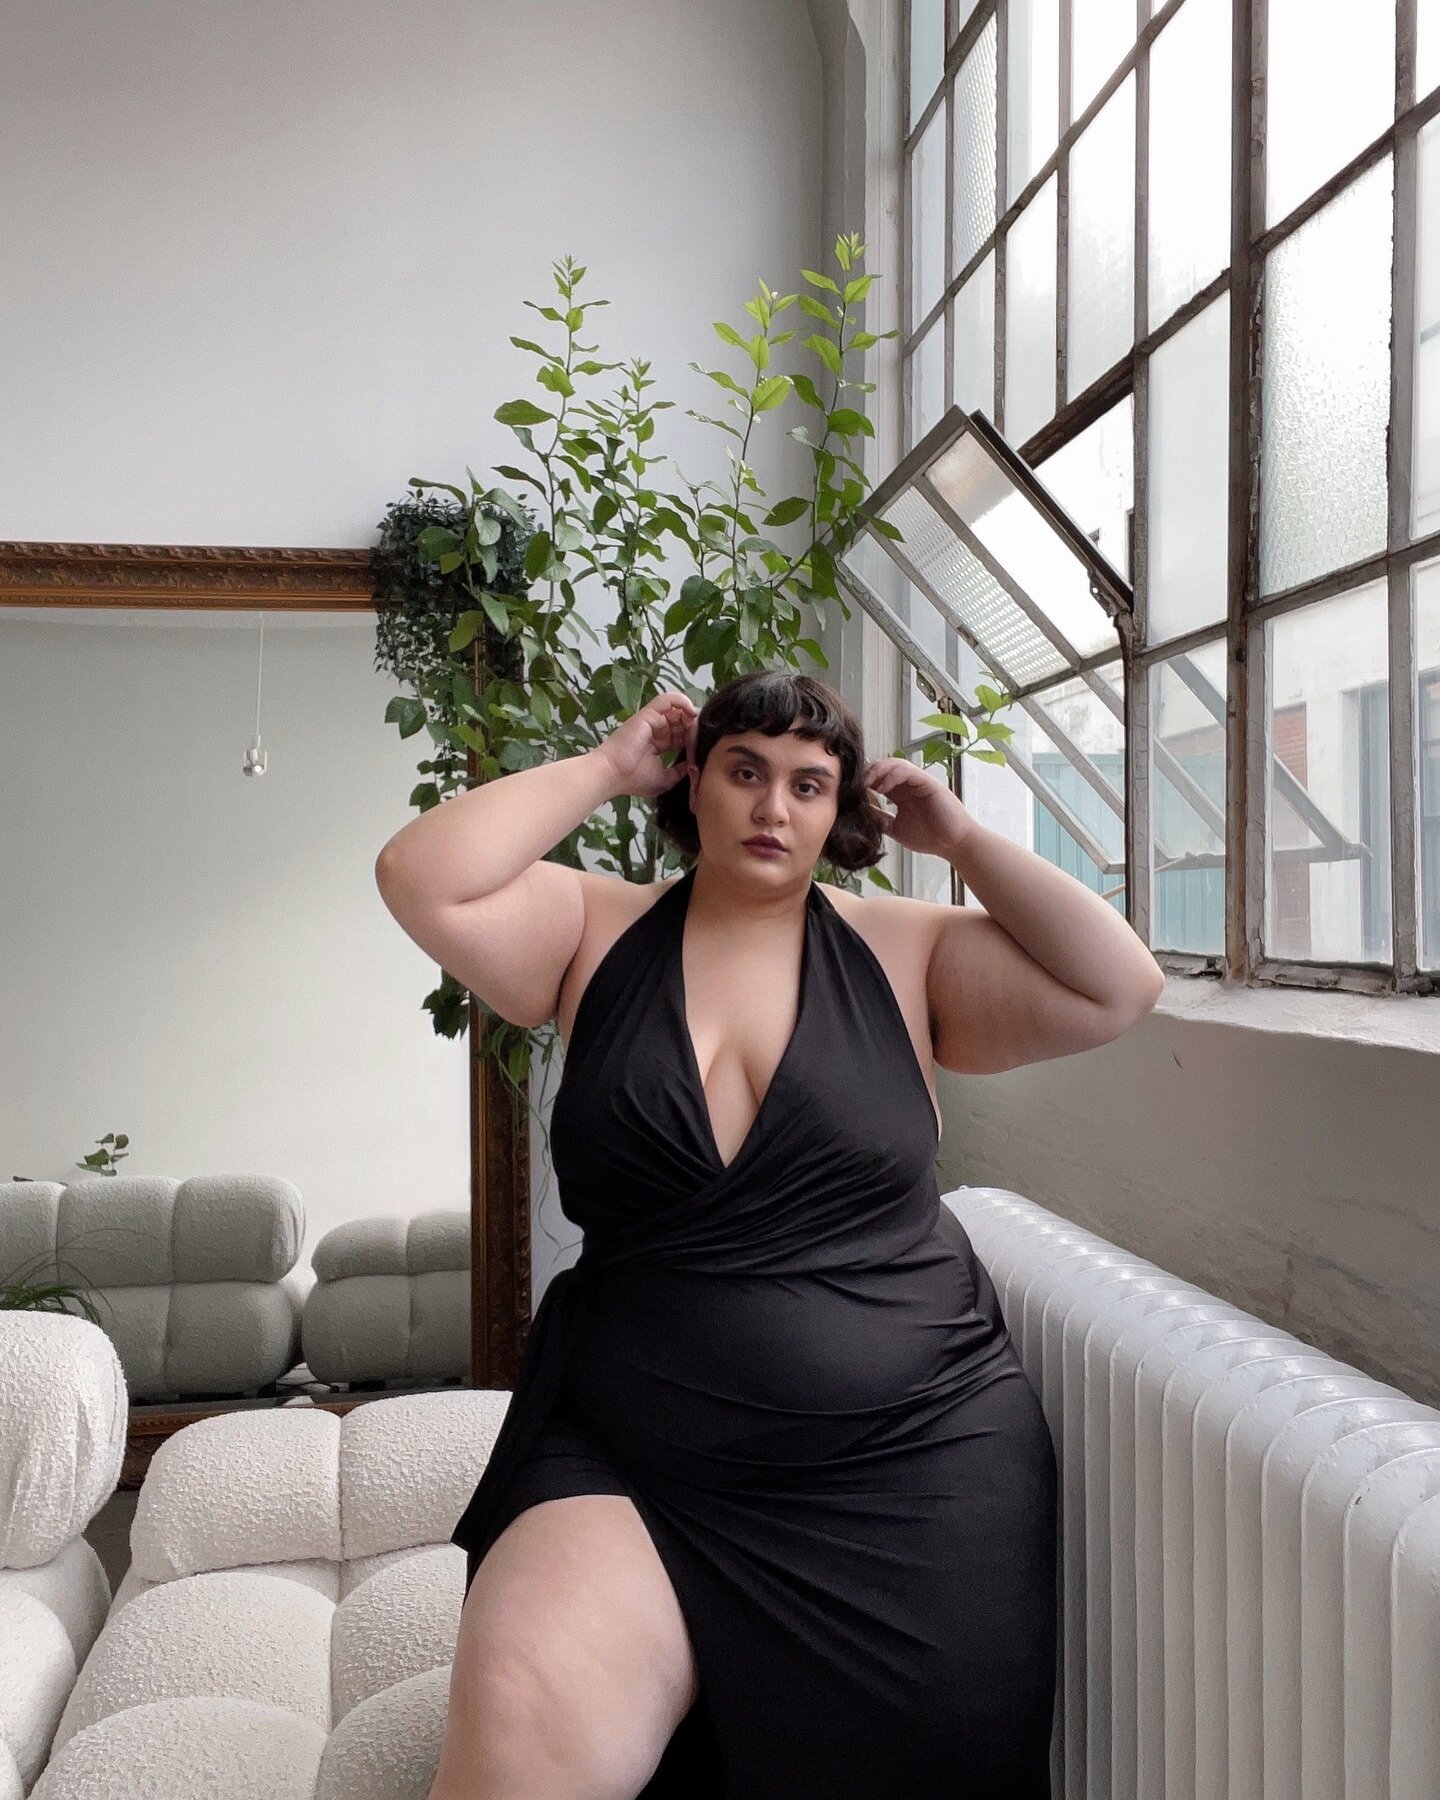 The small business that sent me this dress told me that they chose the name @livdapparel (pronounced &ldquo;livid&rdquo;) because they were livid at the plus size fashion offerings on the market. That really stuck with me, because I&rsquo;m livid too